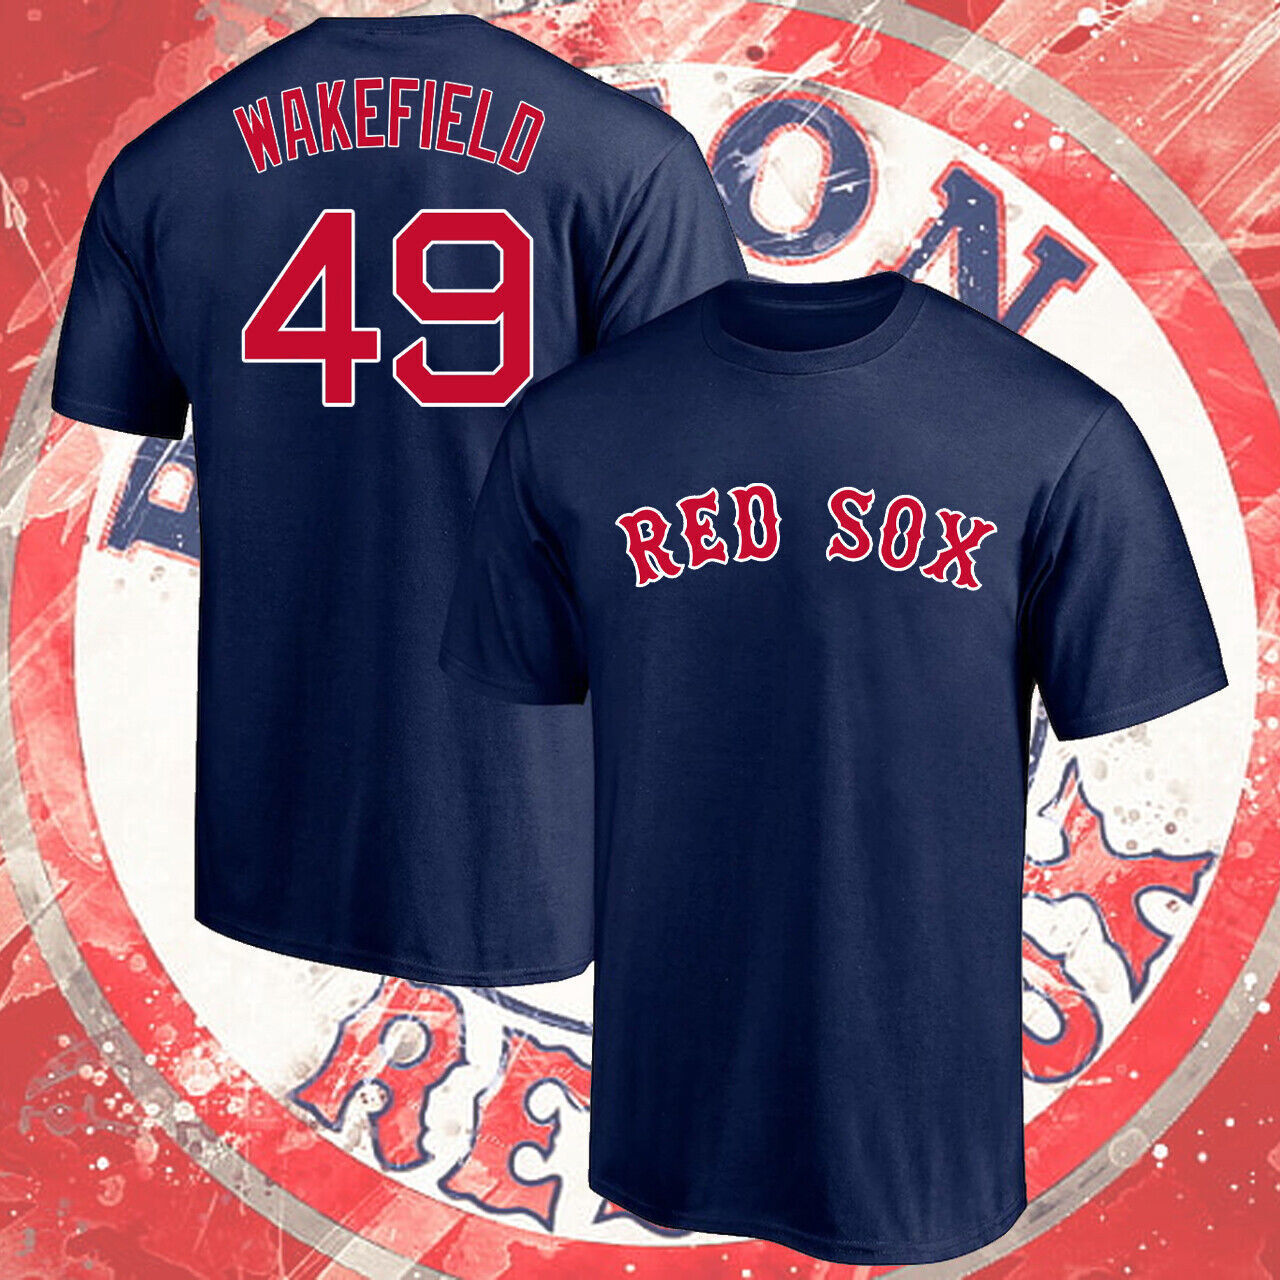 SALE Tim Wakefield #49 Boston Red Sox Name & Number T shirt Gift Fan S_5XL